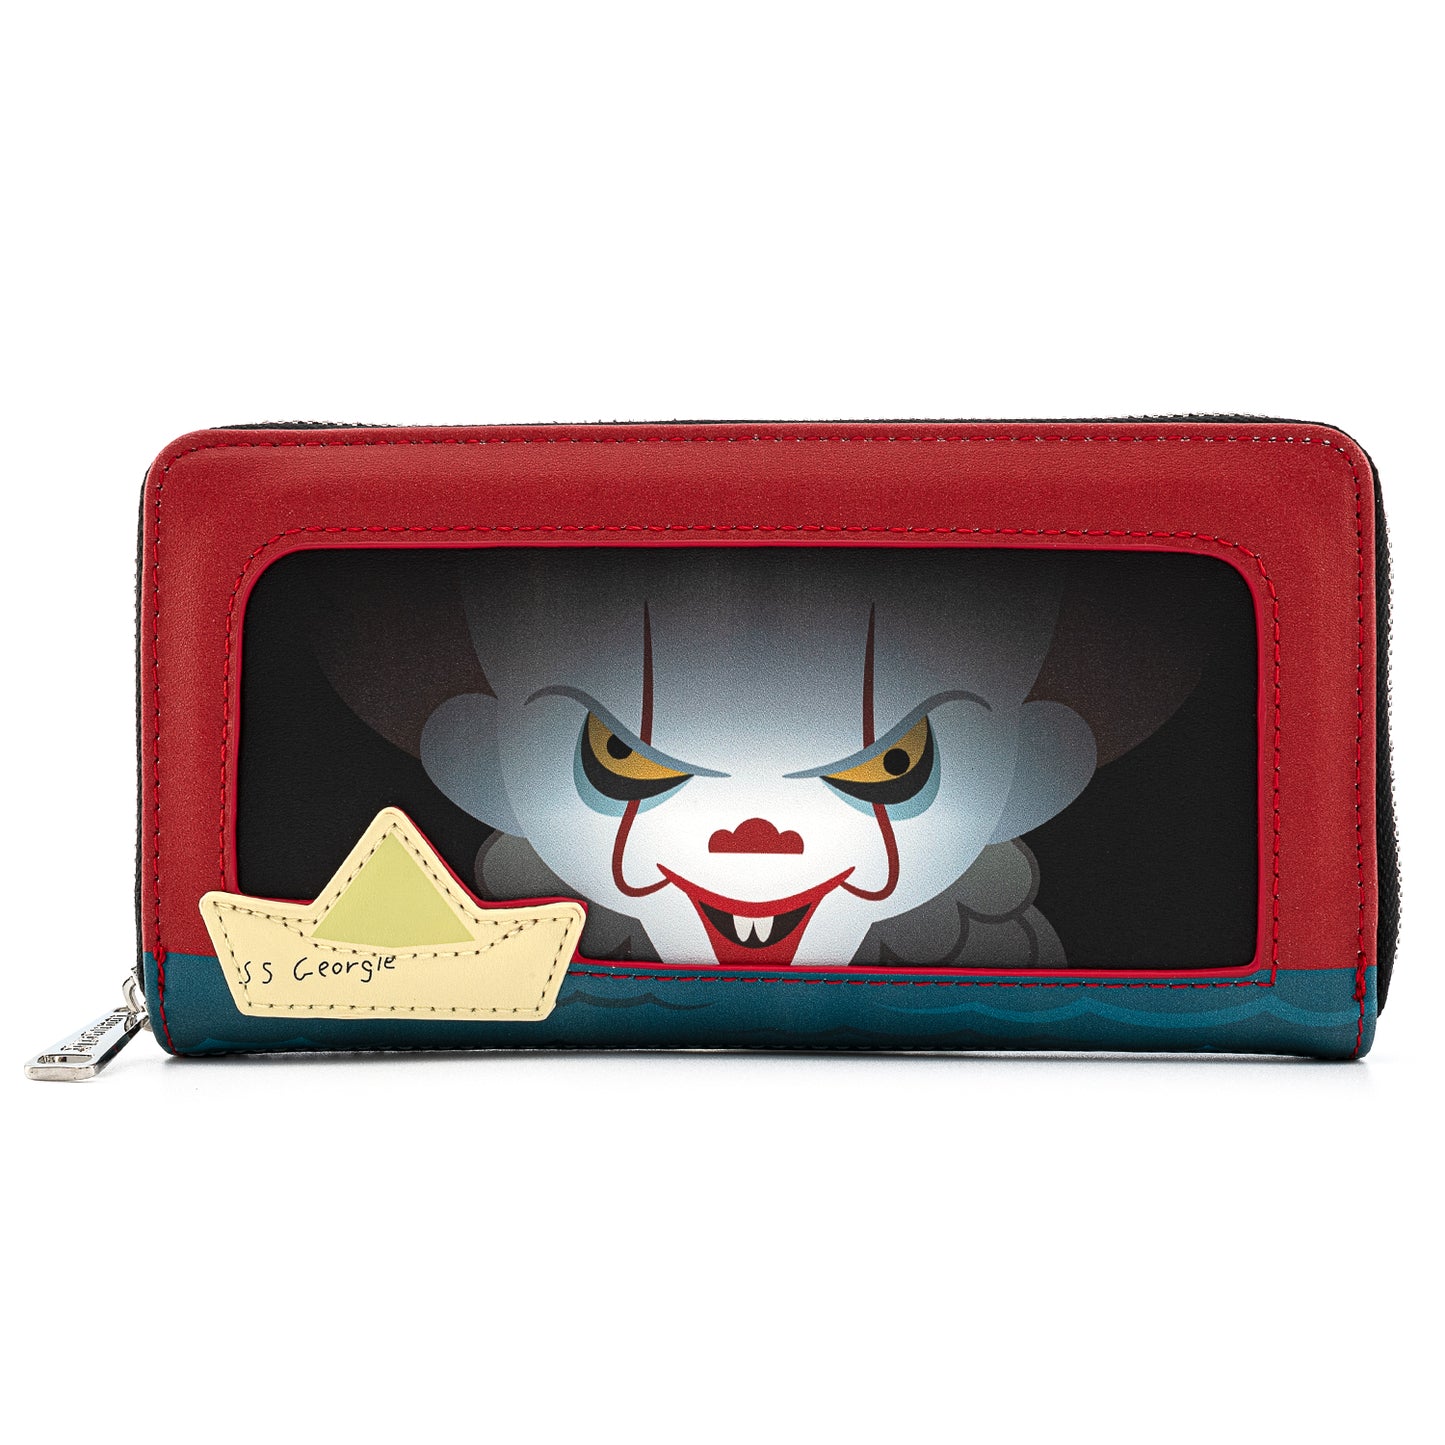 IT x Loungefly Pennywise SS George Sewer Scene Zip Wallet